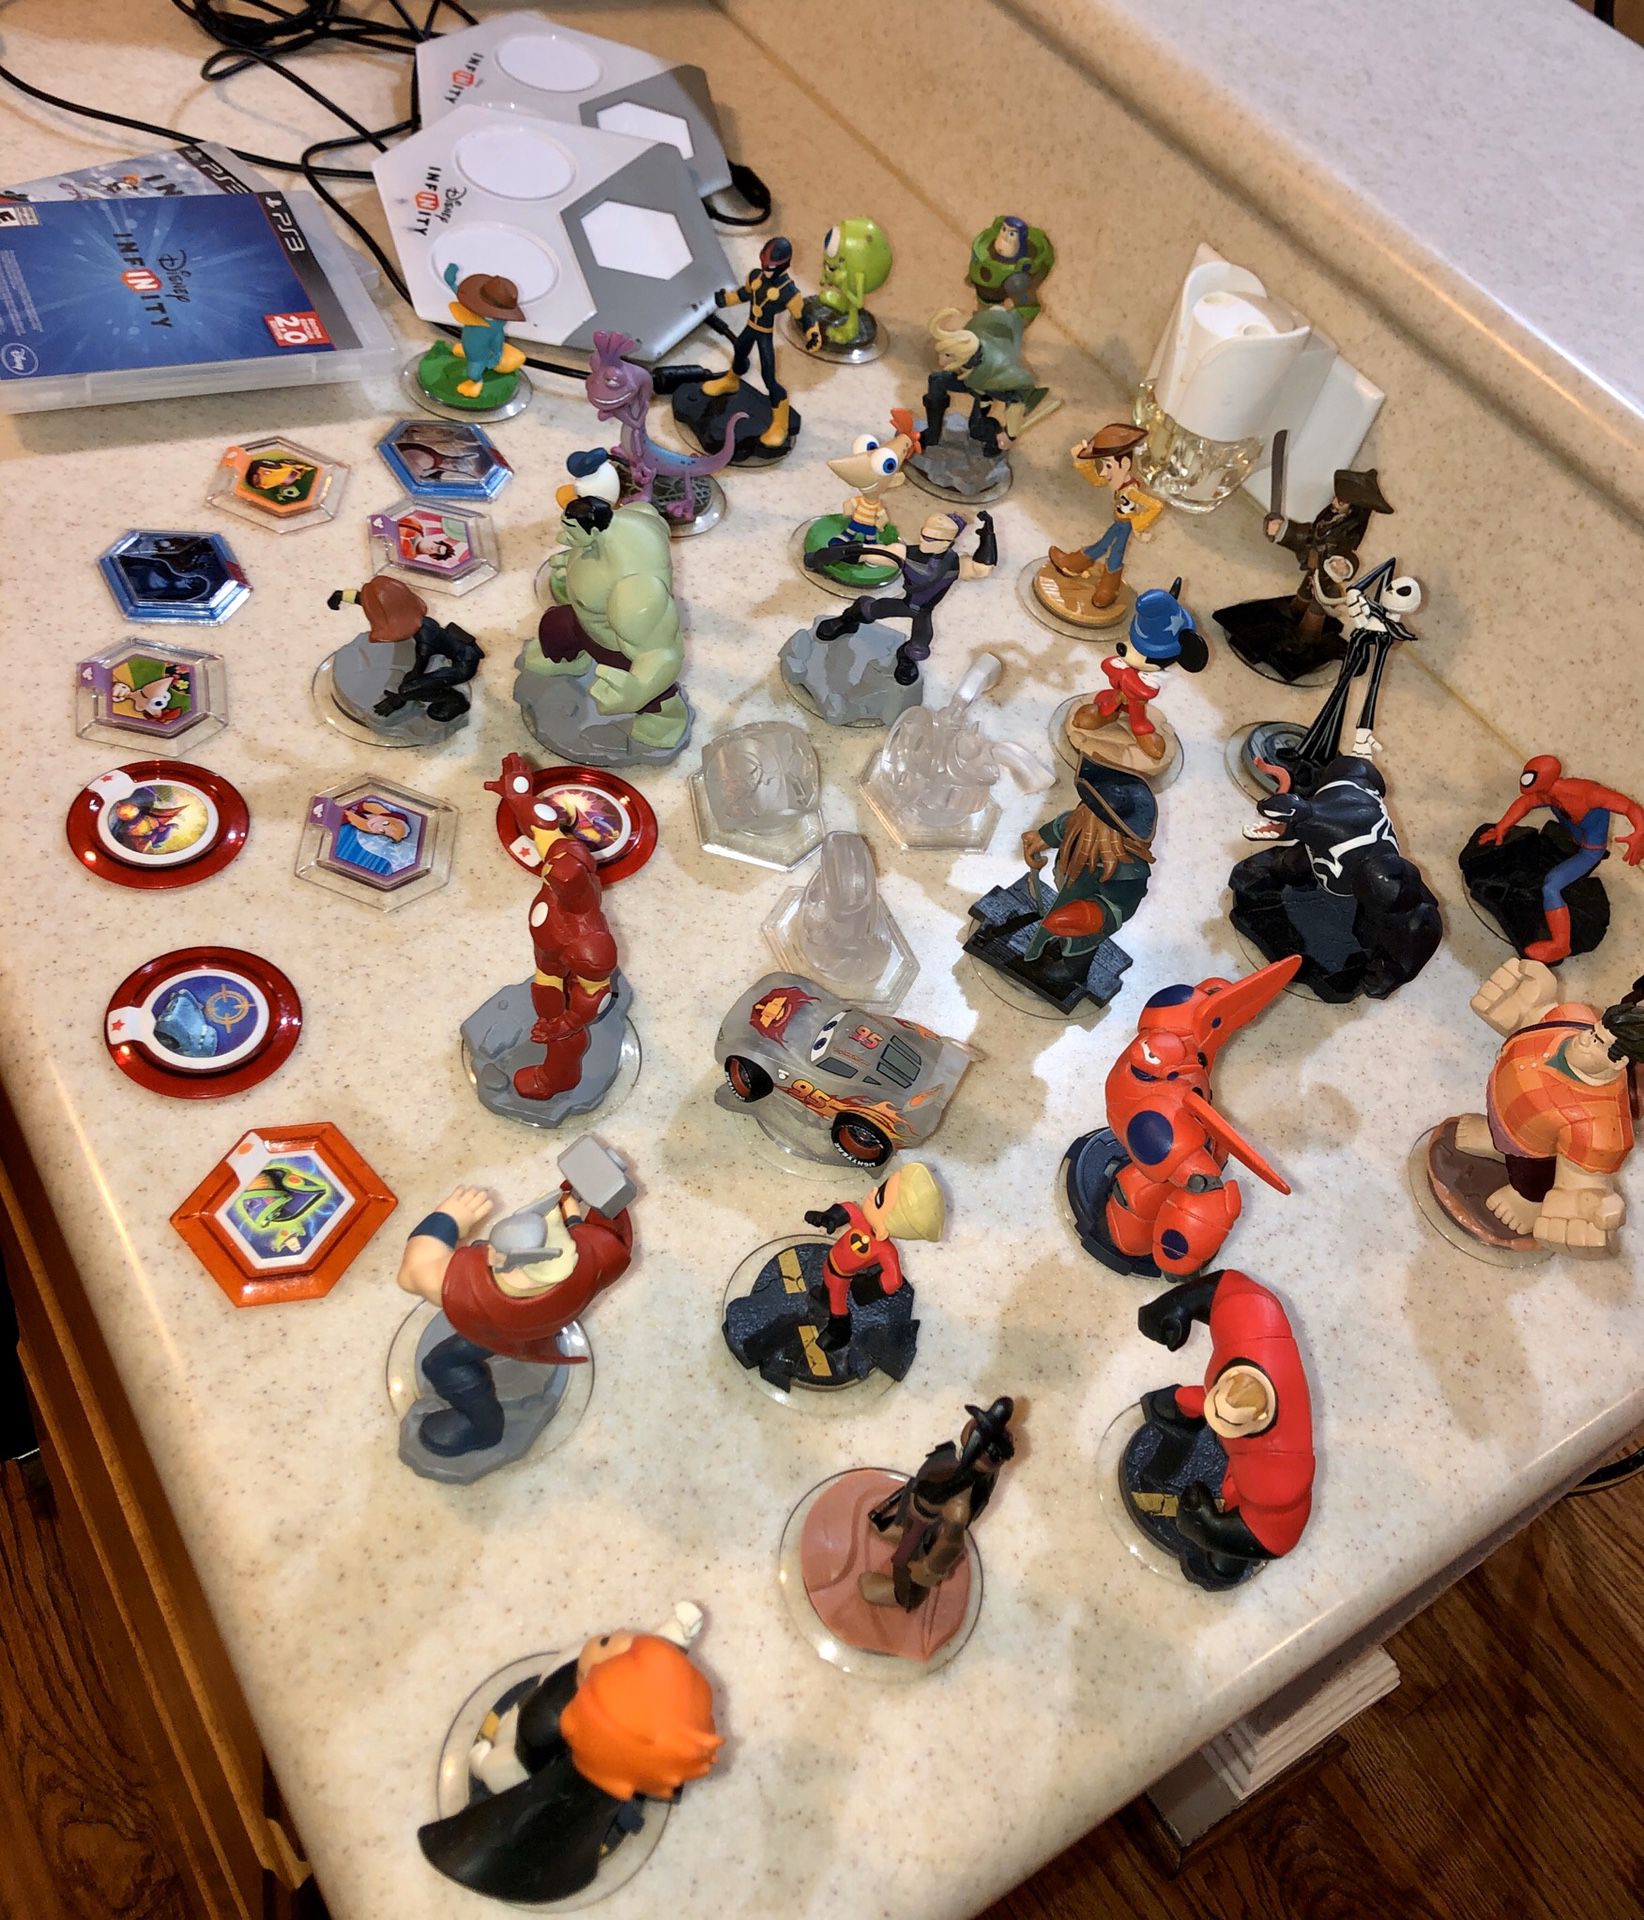 Disney Infinity for PS3 - two portals and 31 figurines